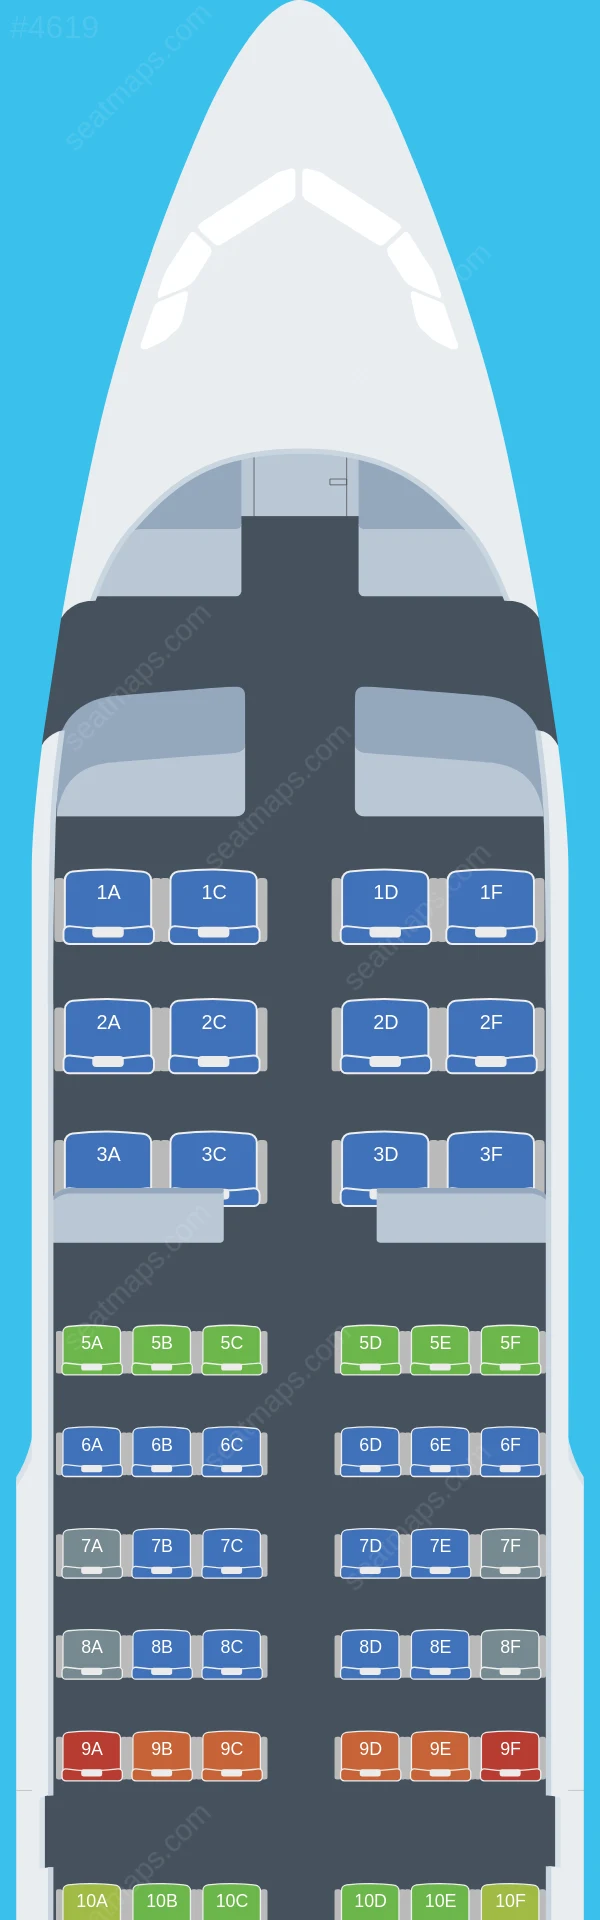 Chengdu Airlines Airbus A319-100 V.2 seatmap preview